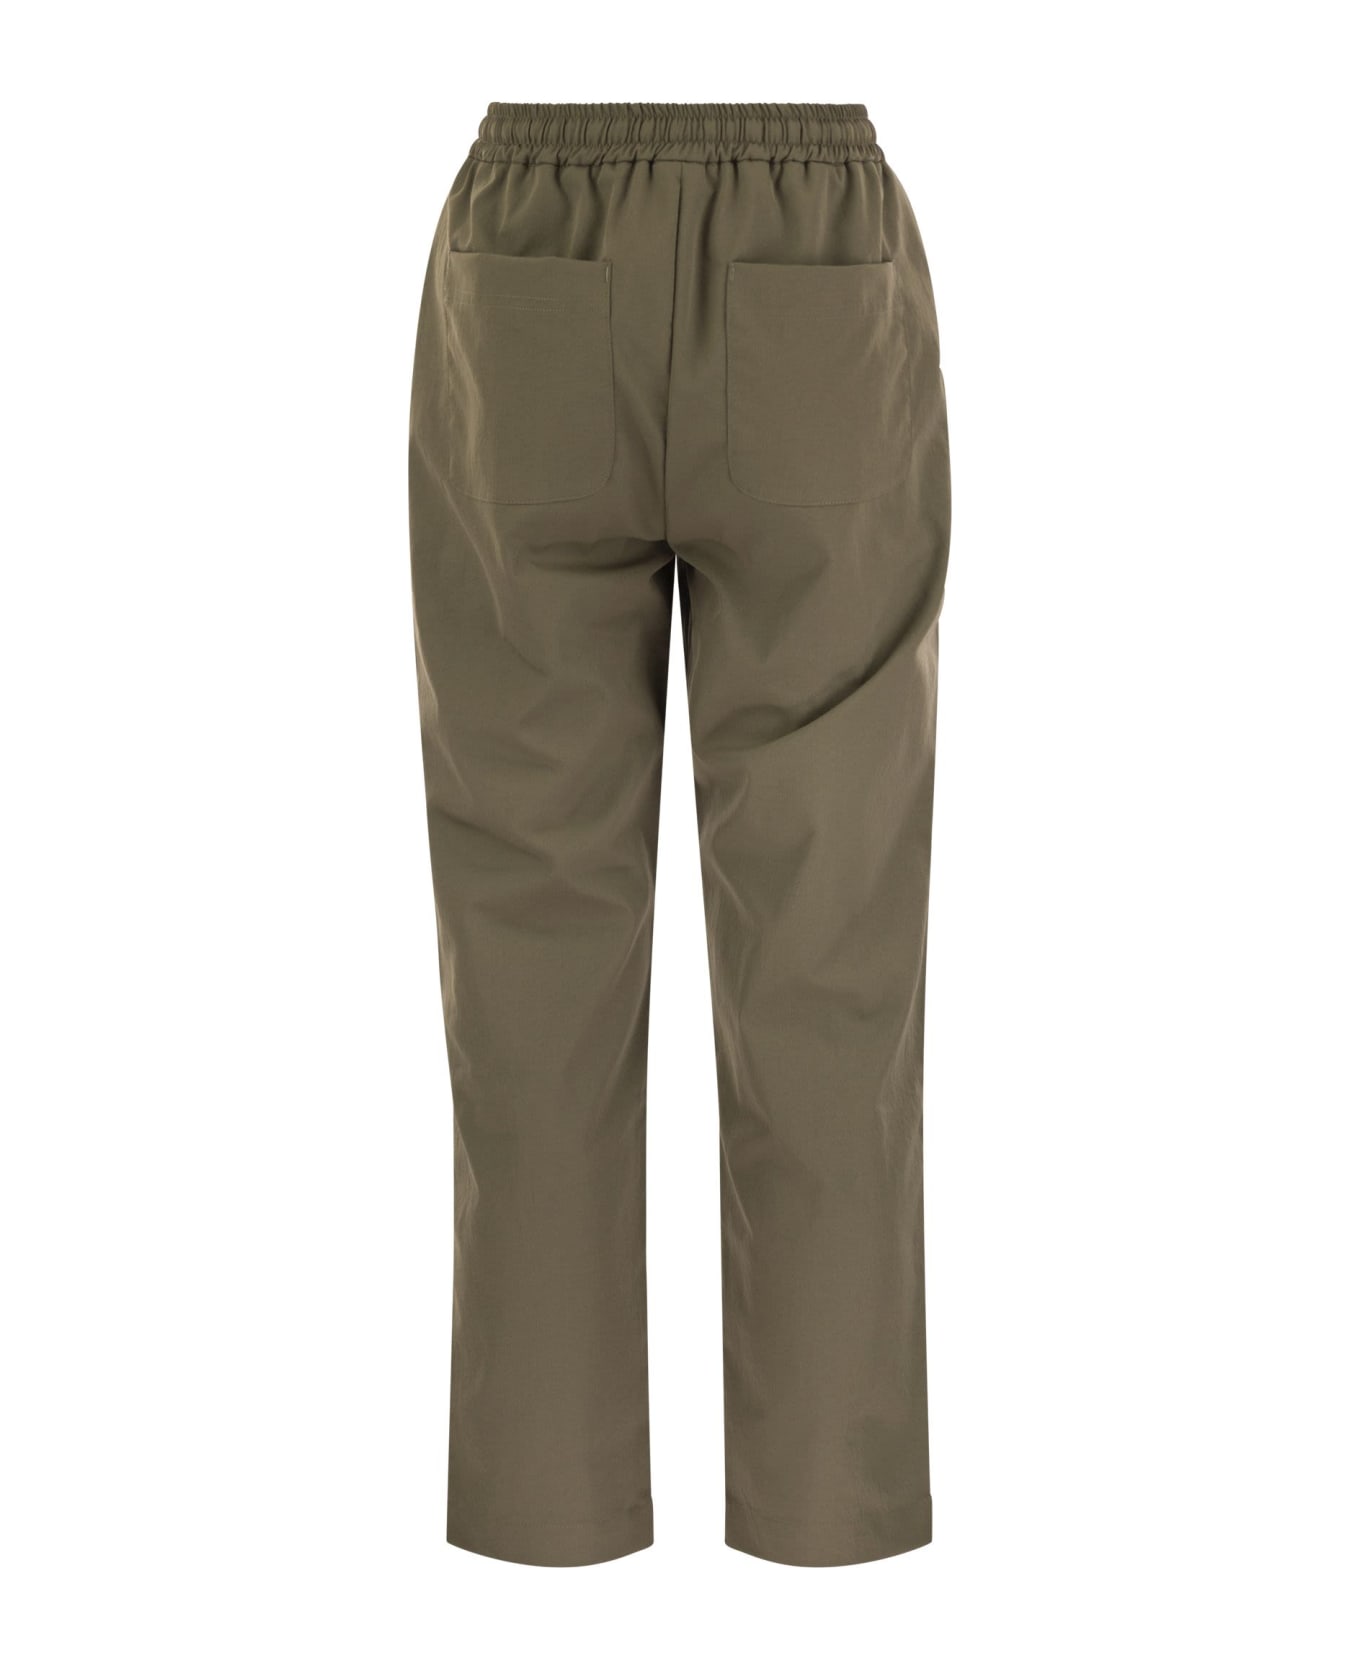 Colmar Classy - Trousers With Darts - Military Green ボトムス